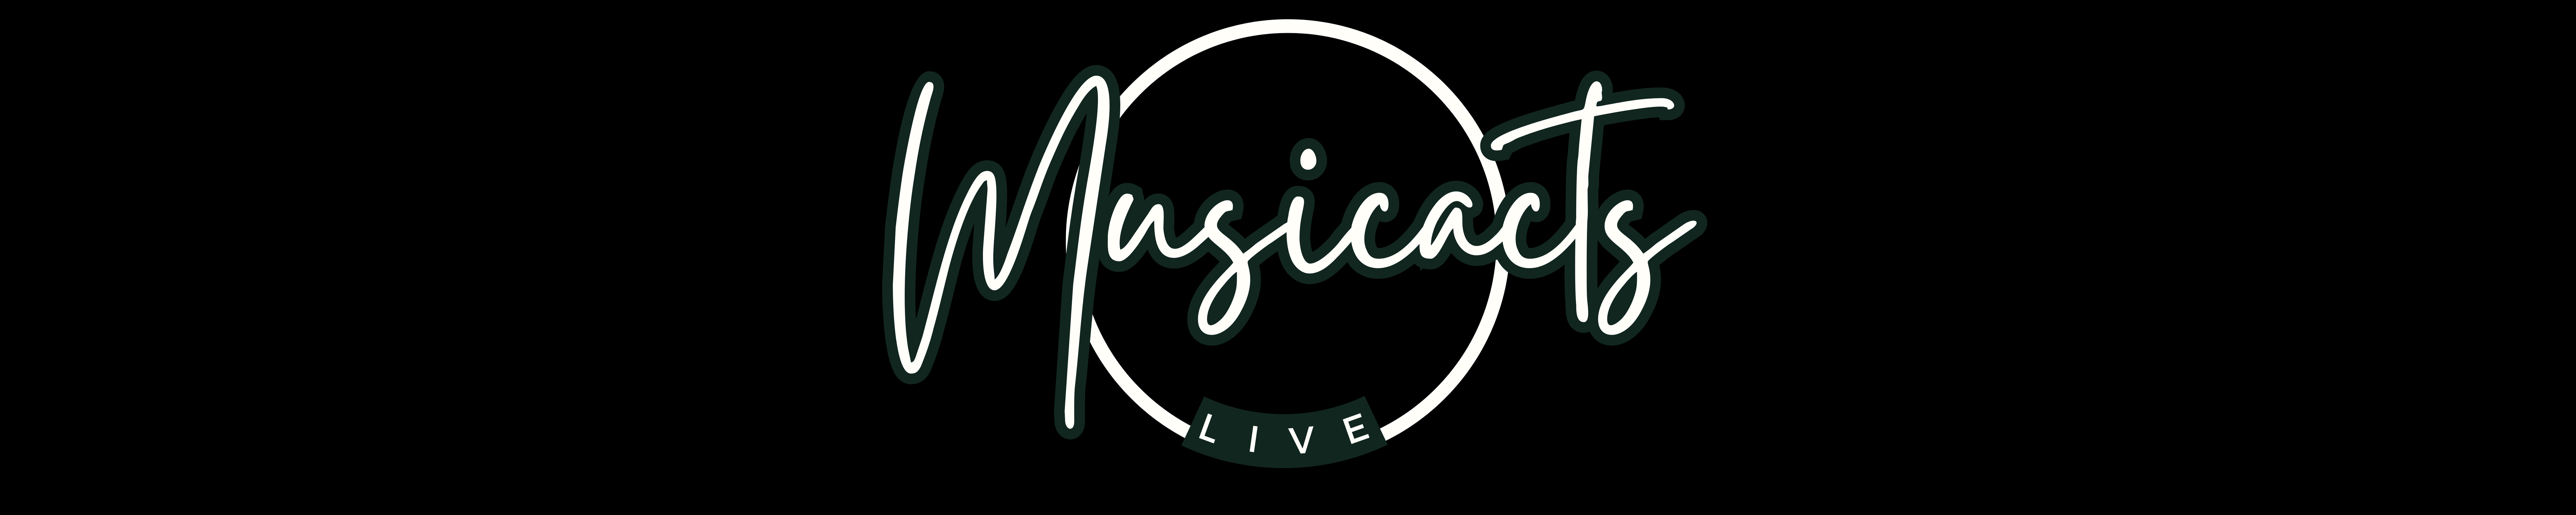 Musicacts-live